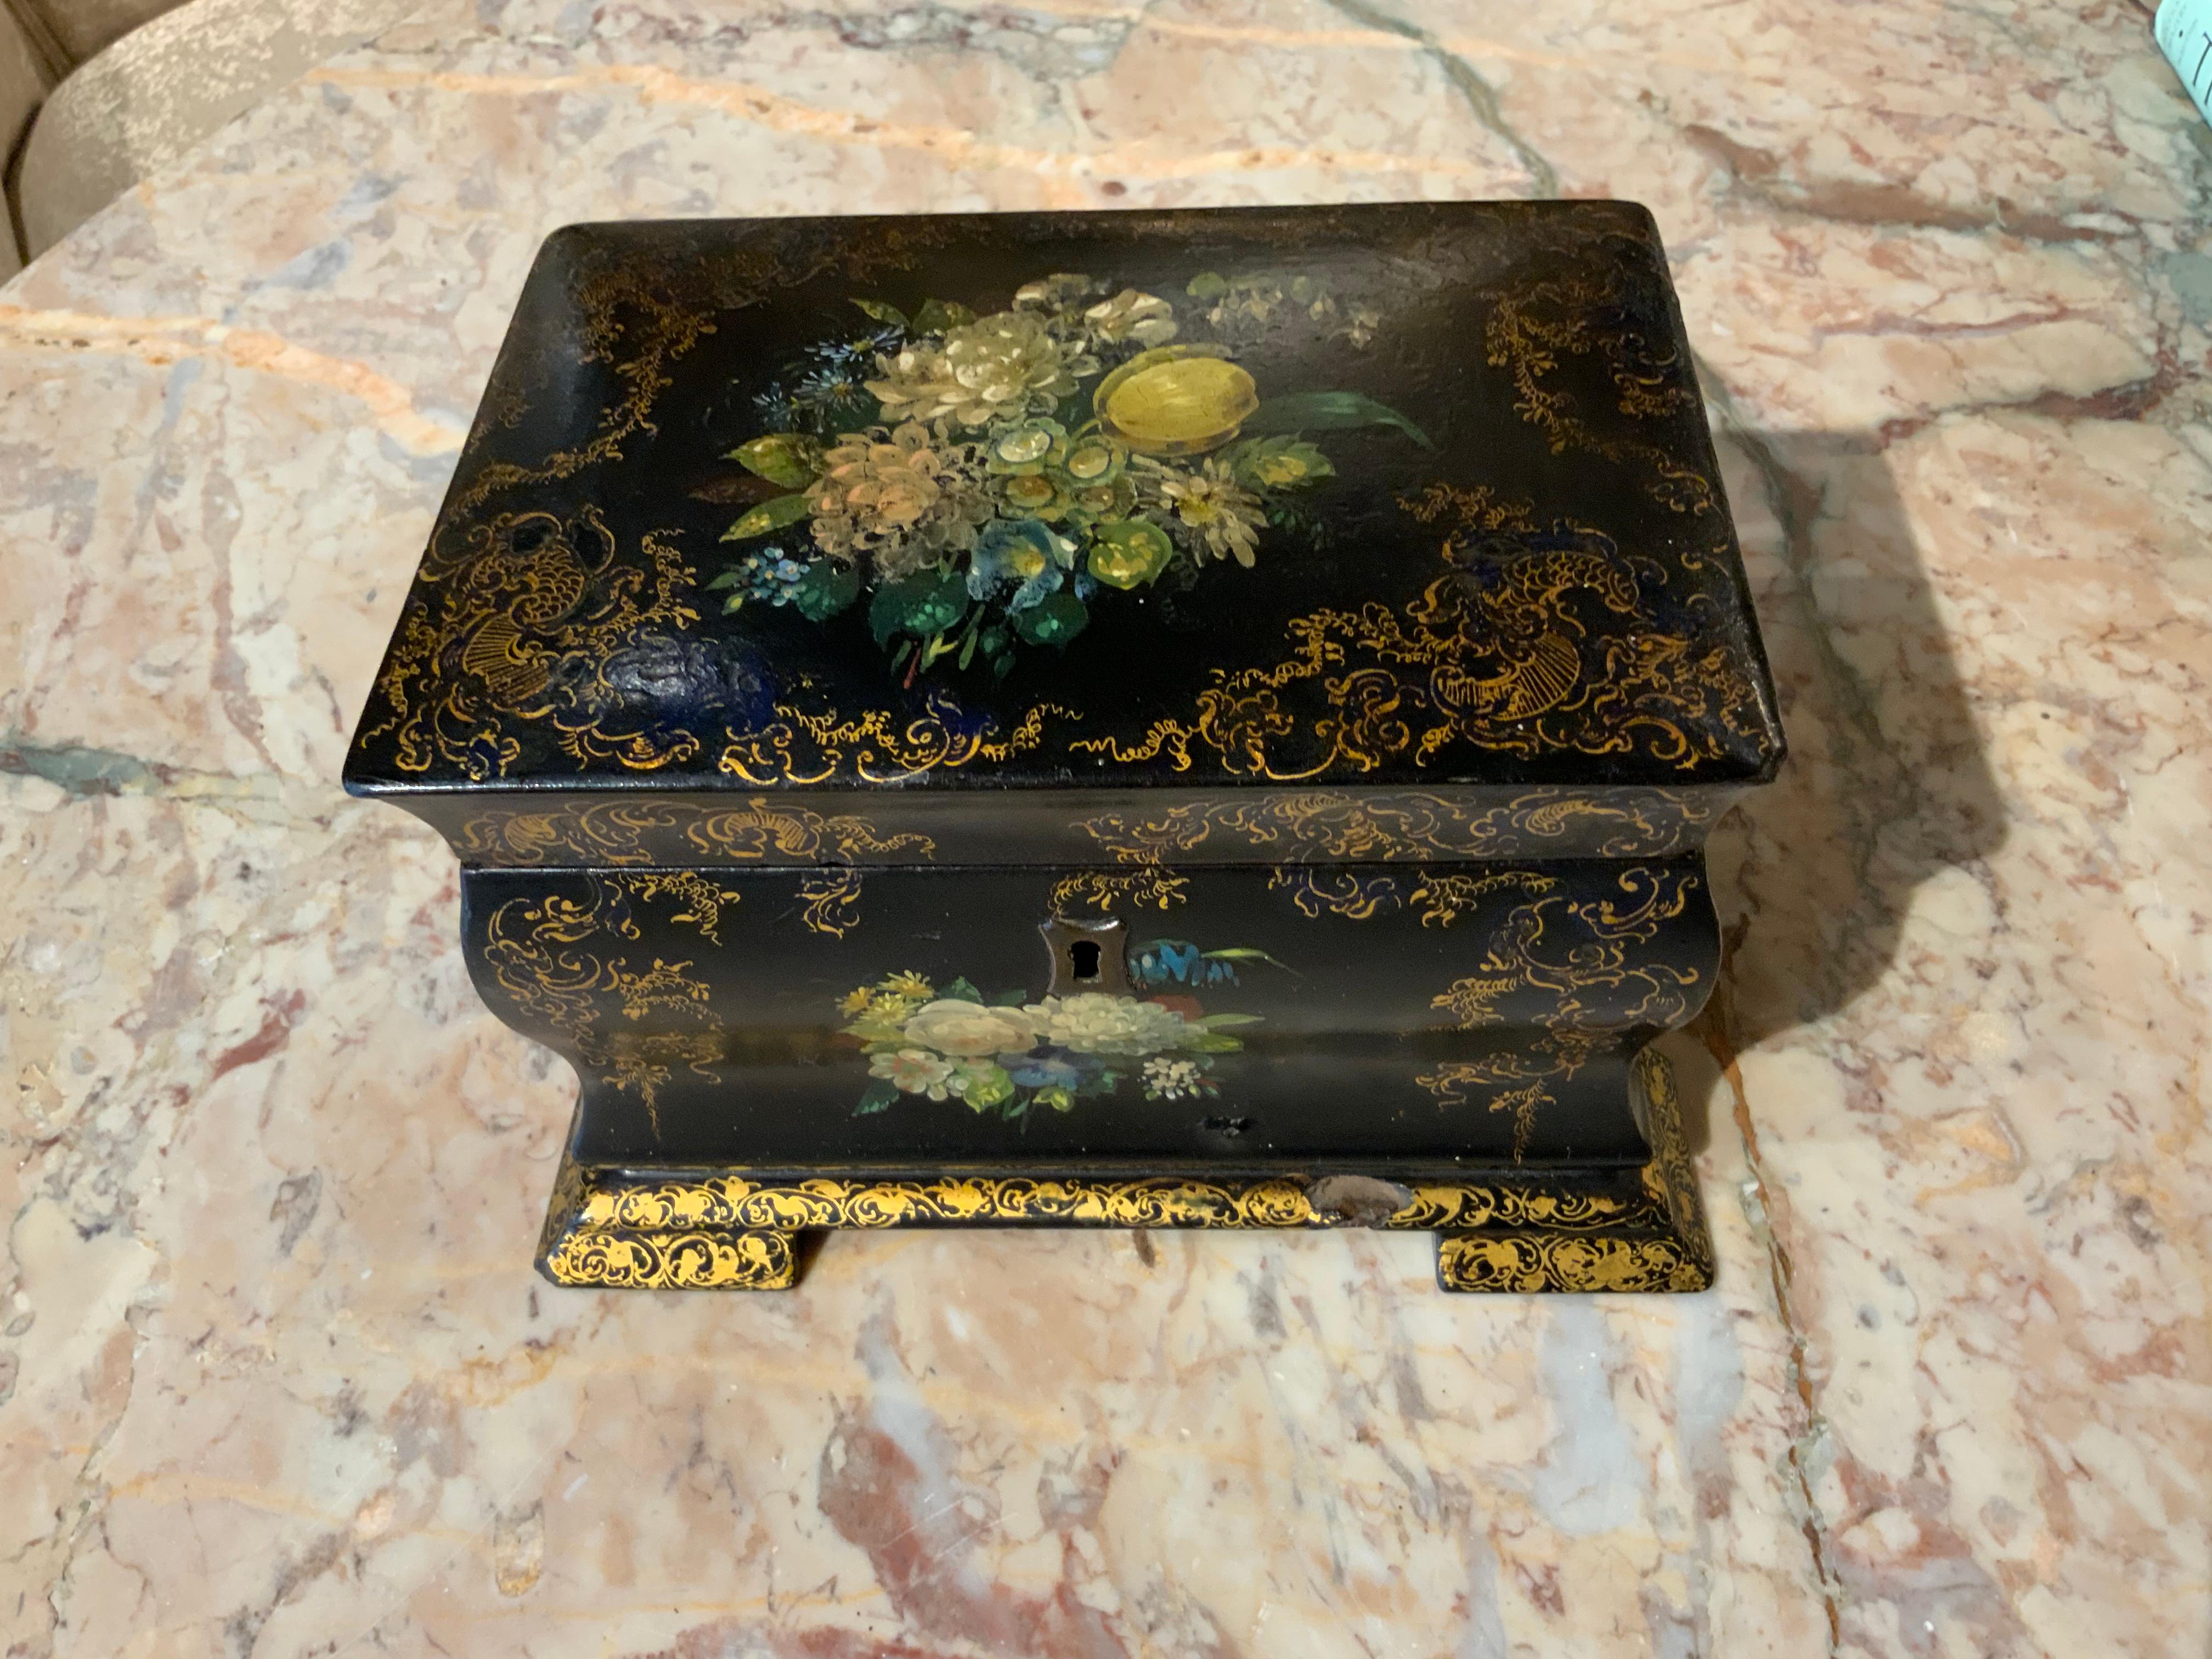 19th Century Papier-Mâché Tea Caddie /1850 with Floral and Foliate Designs with Black Ground For Sale